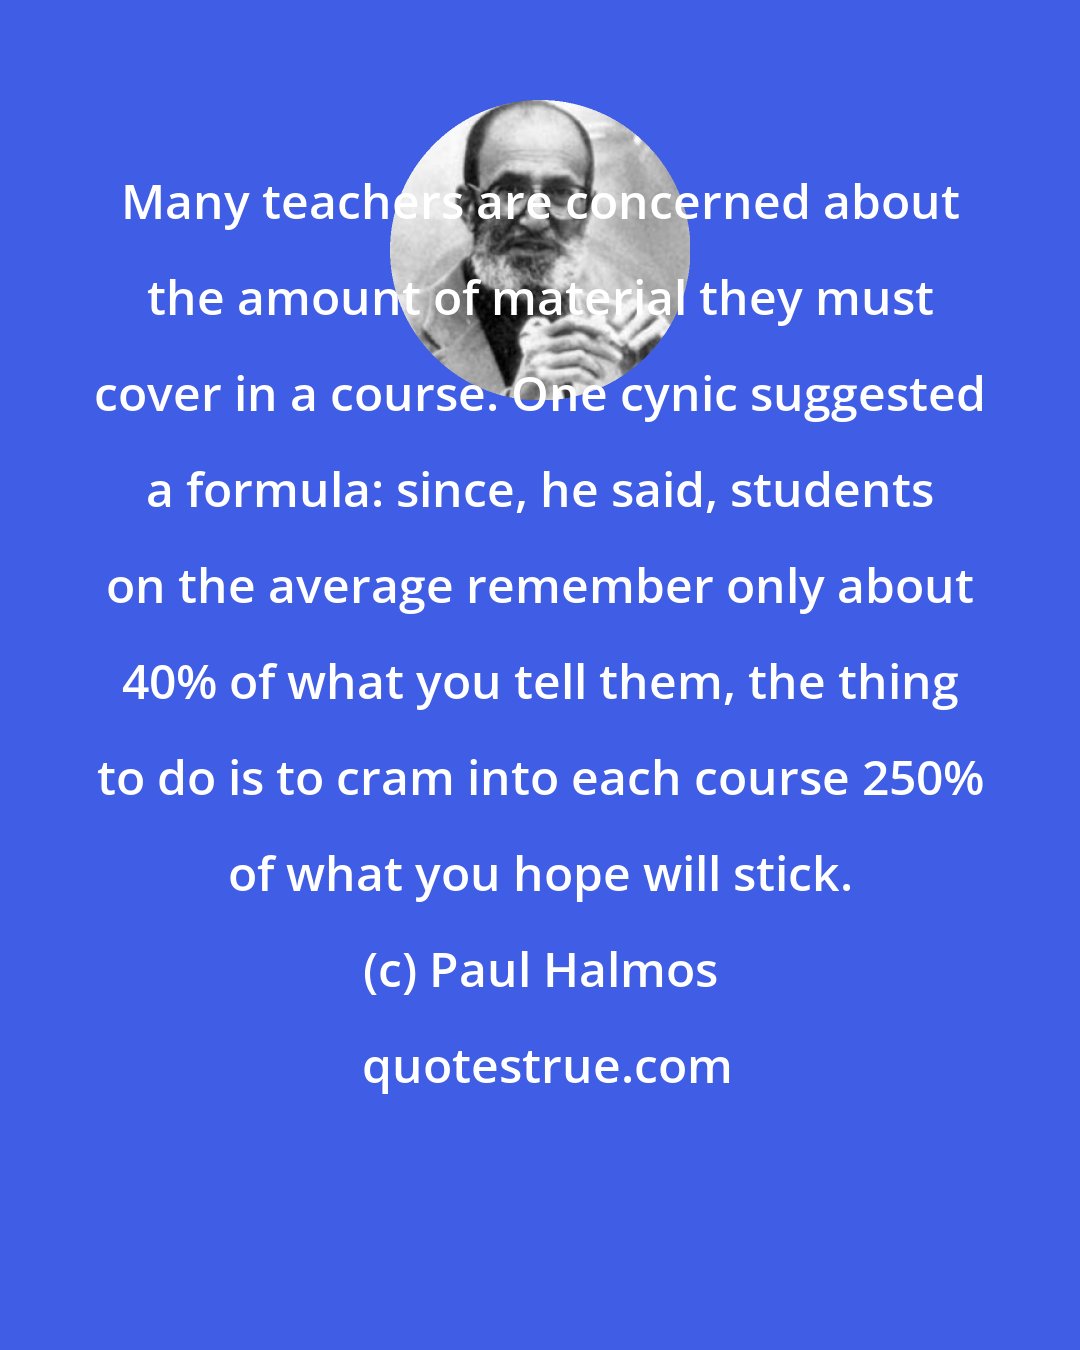 Paul Halmos: Many teachers are concerned about the amount of material they must cover in a course. One cynic suggested a formula: since, he said, students on the average remember only about 40% of what you tell them, the thing to do is to cram into each course 250% of what you hope will stick.